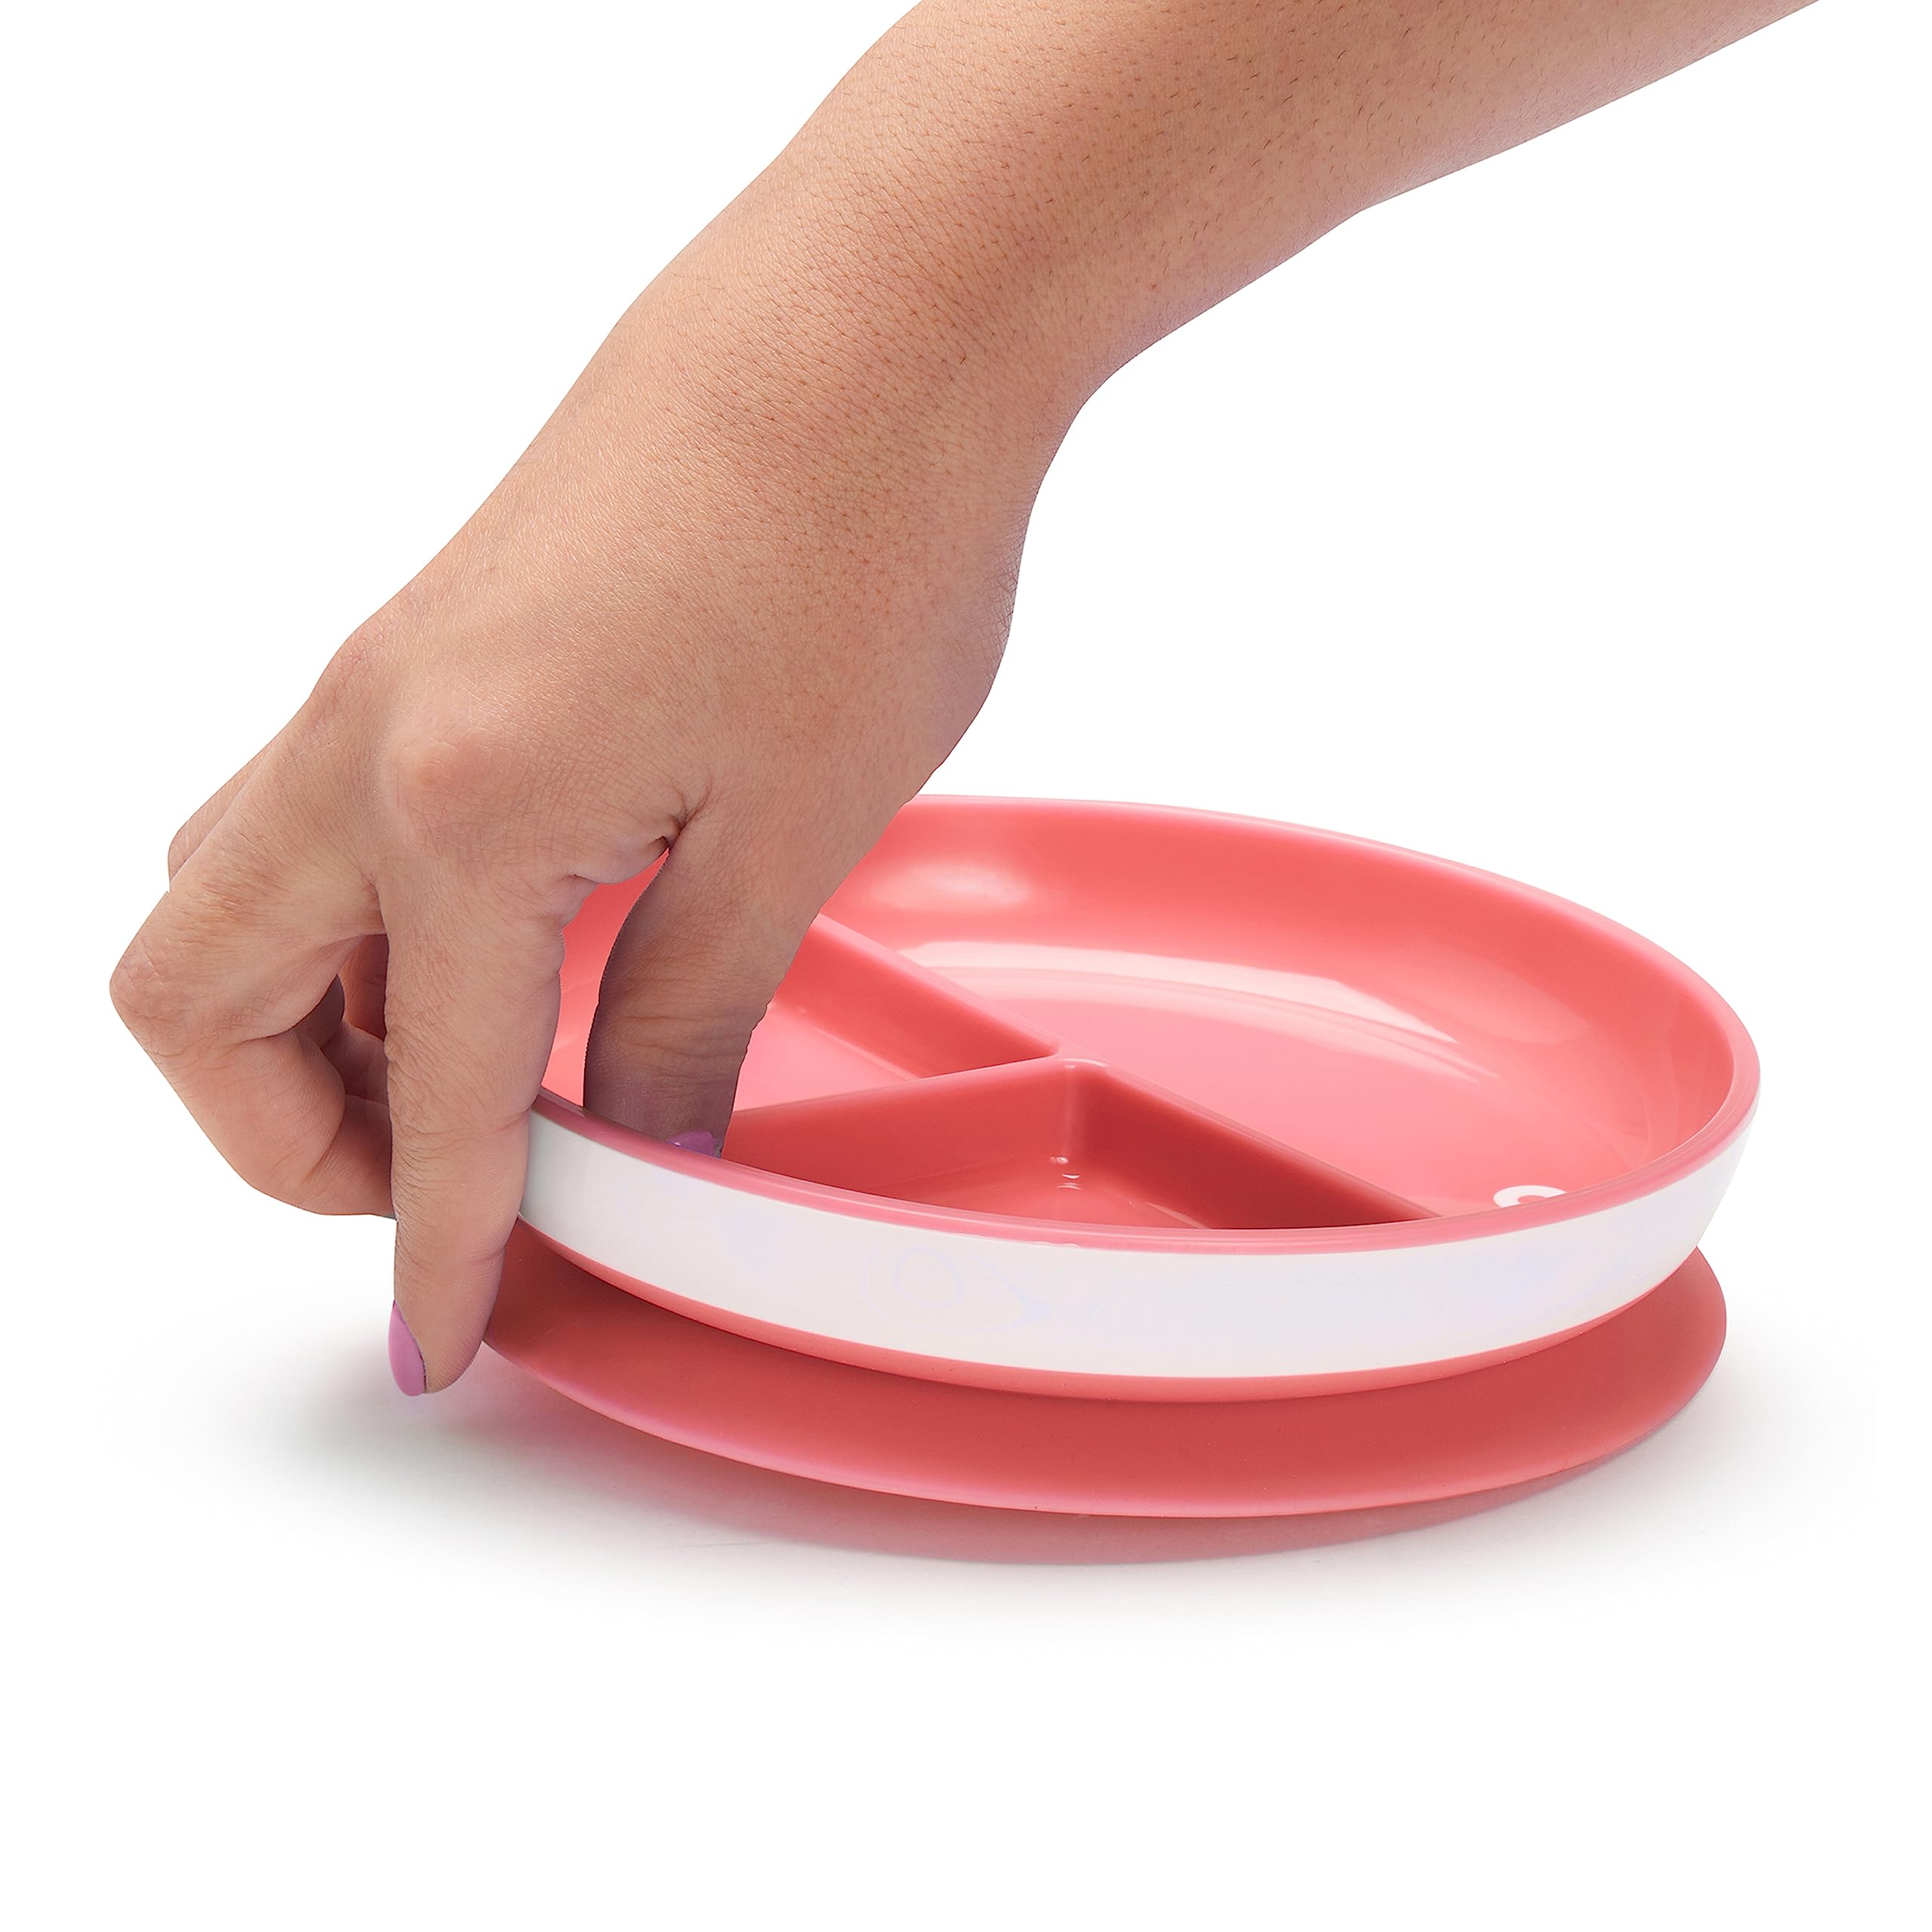 Munchkin® Stay Put™ Divided Suction Toddler Plates, Pink/Purple